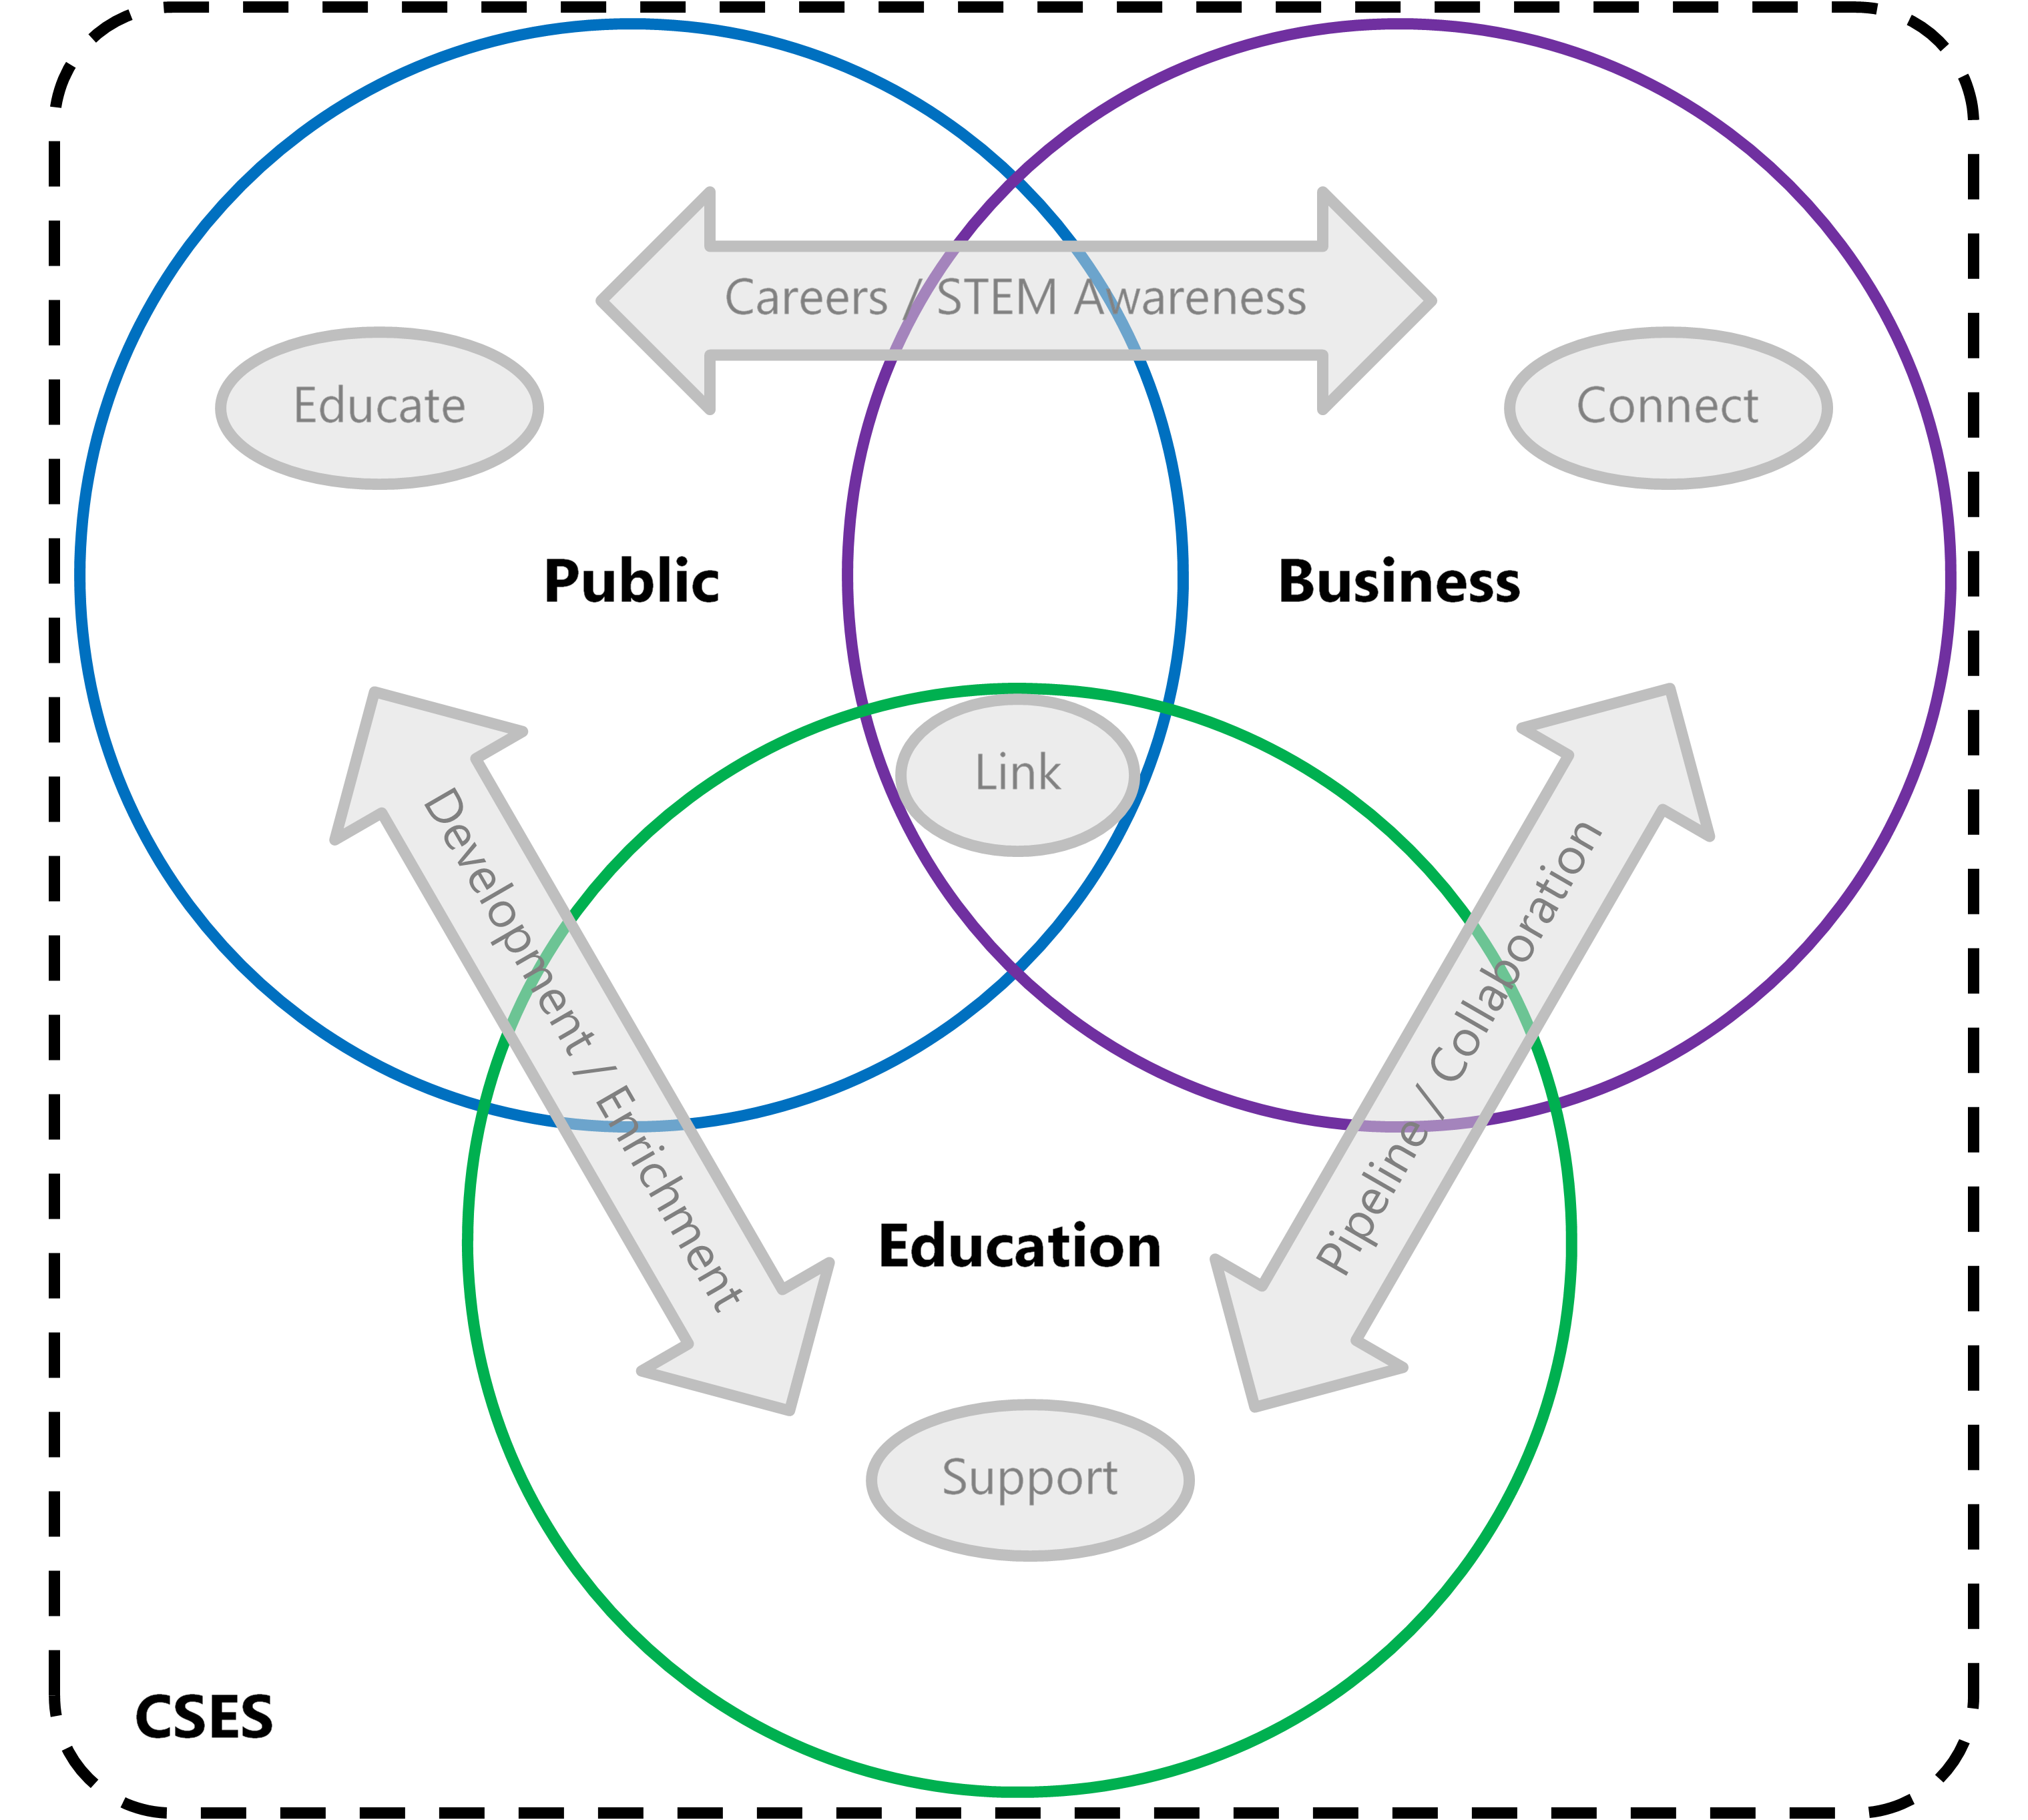 CSES Vision and Mission